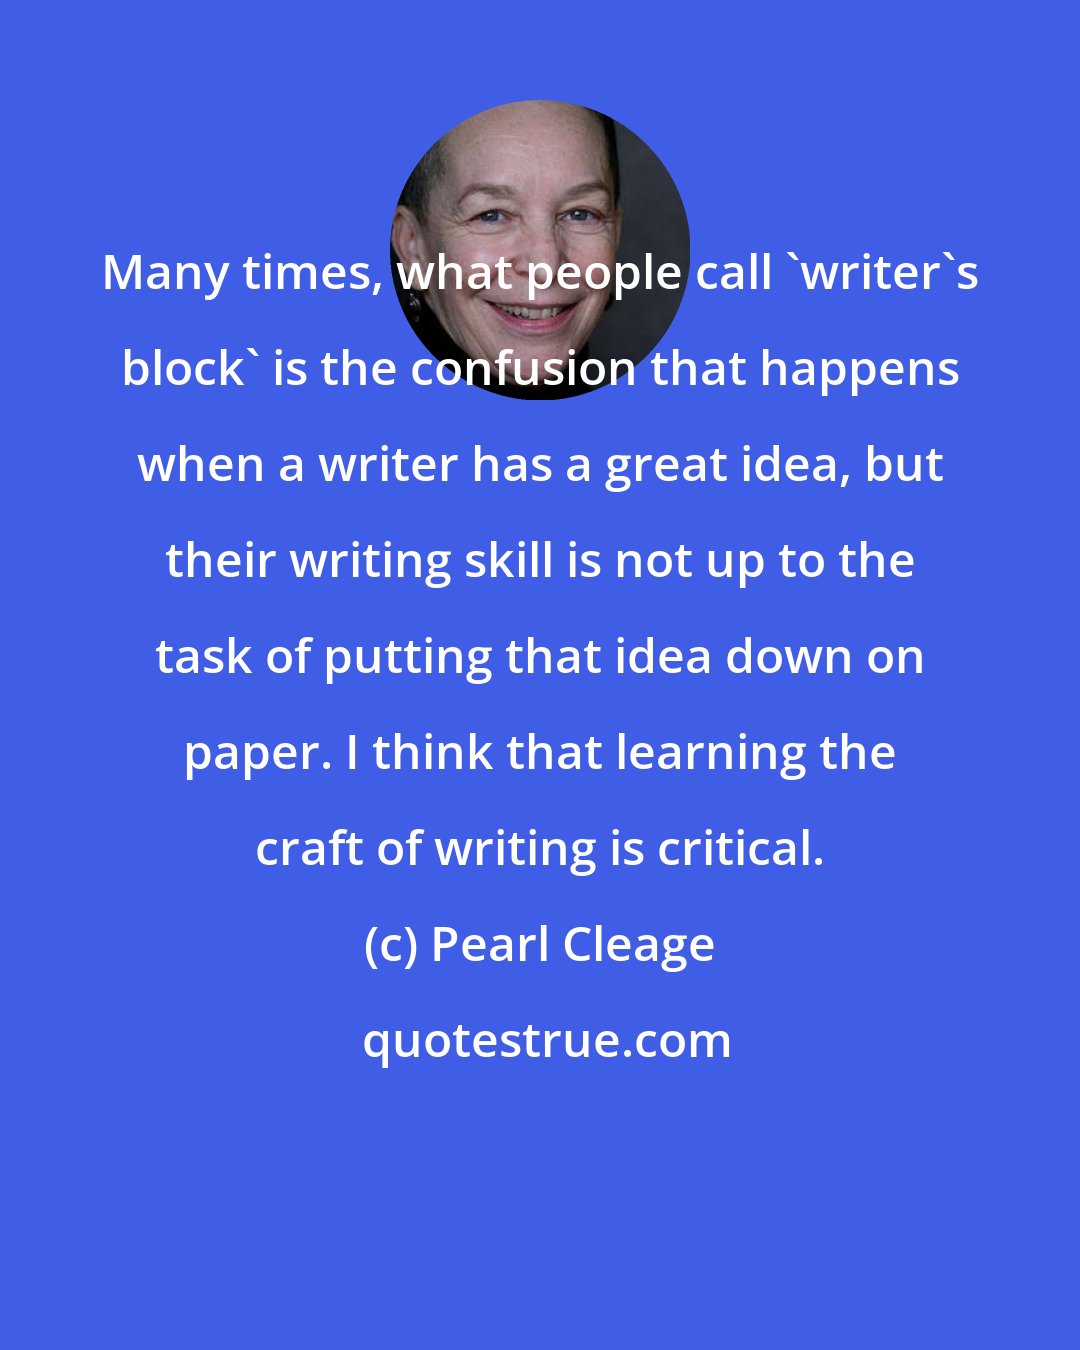 Pearl Cleage: Many times, what people call 'writer's block' is the confusion that happens when a writer has a great idea, but their writing skill is not up to the task of putting that idea down on paper. I think that learning the craft of writing is critical.